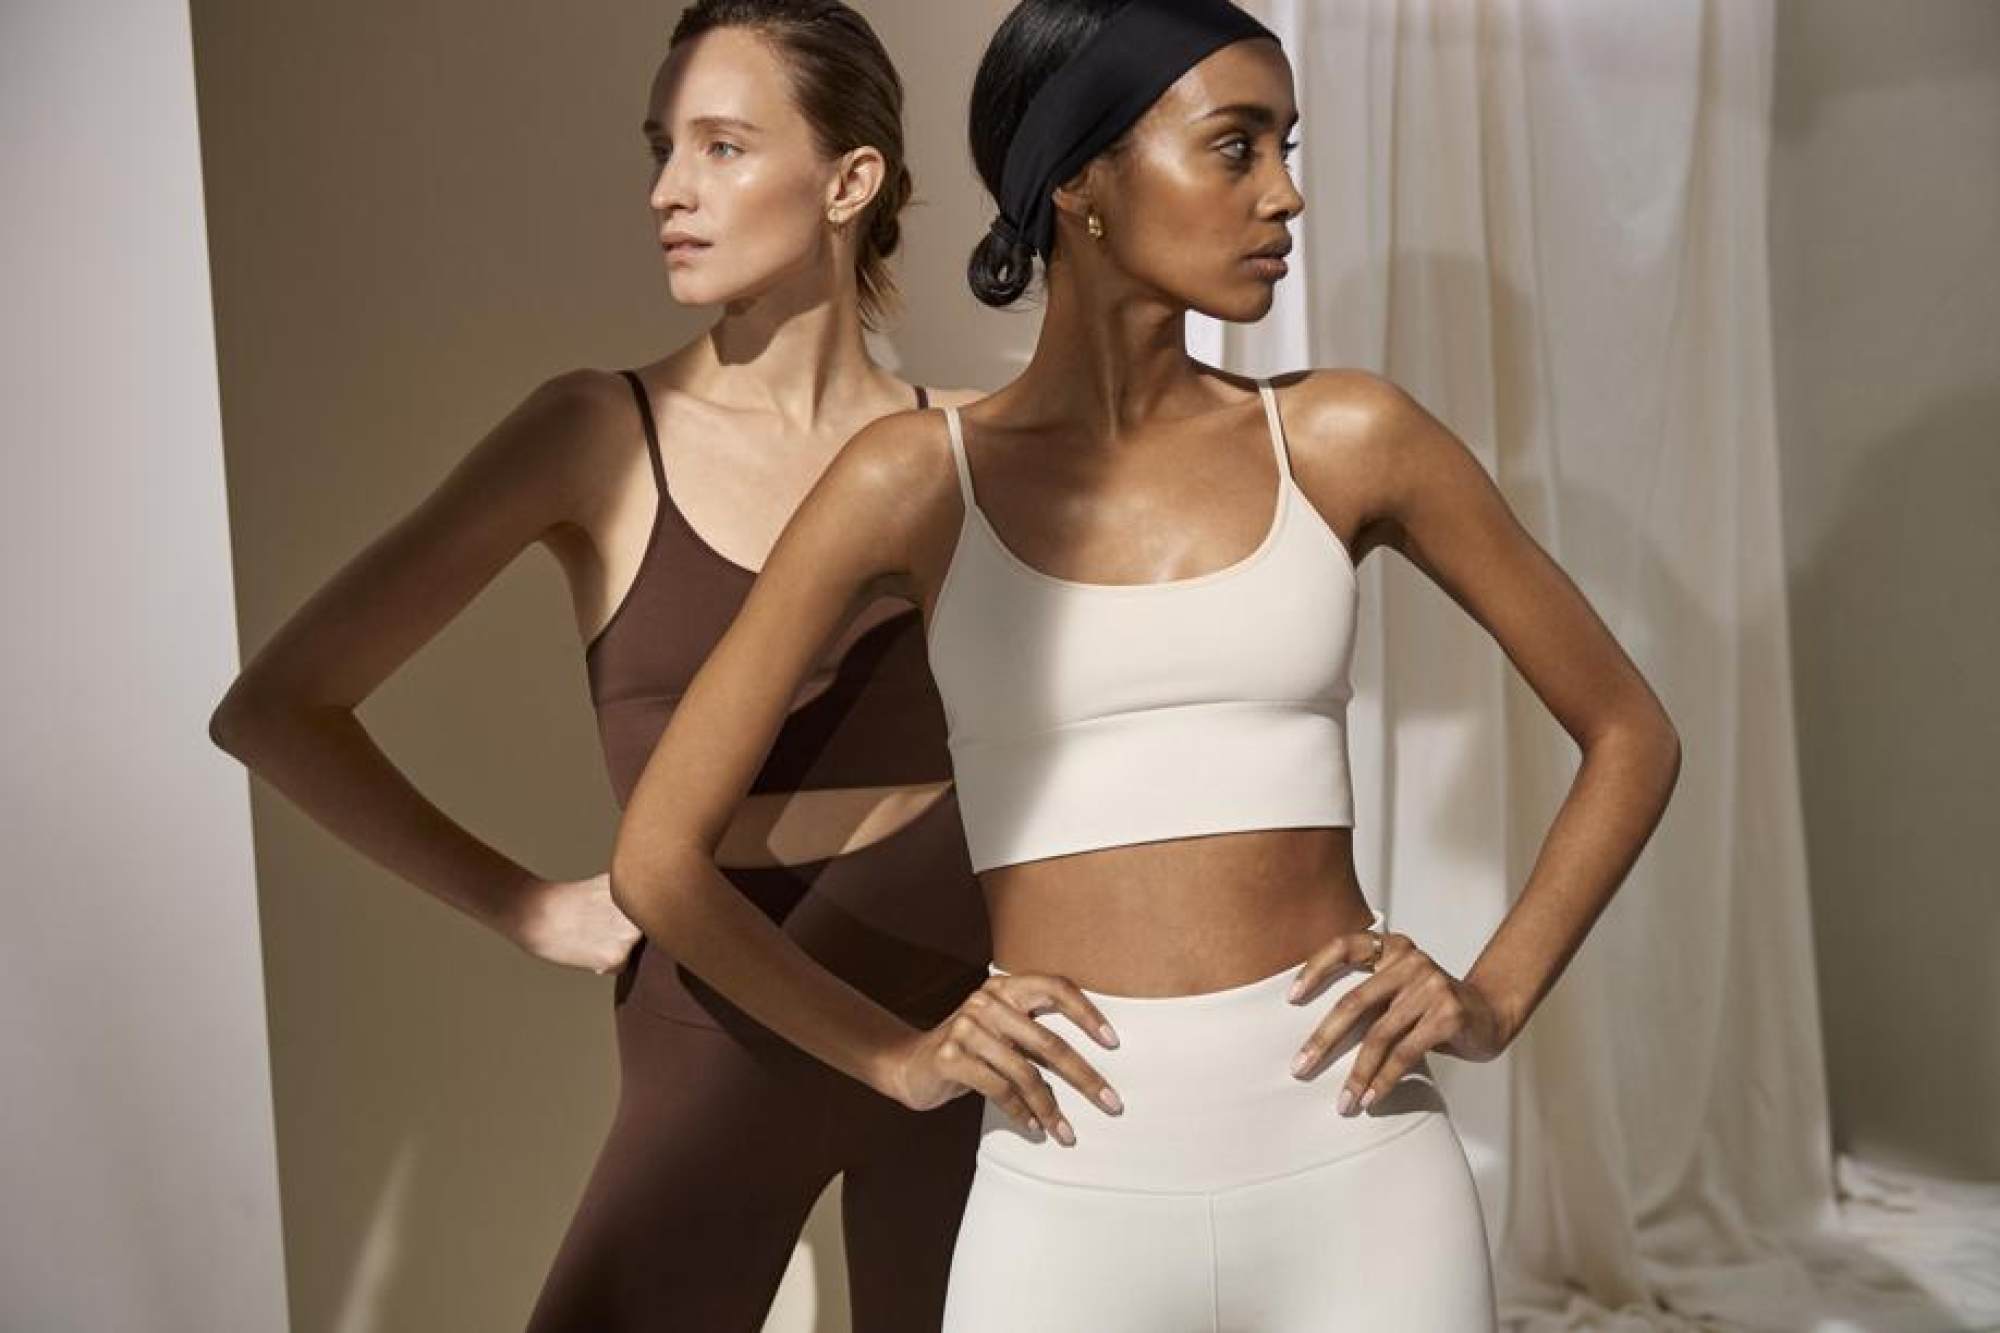 The bralette is what women want in a post-coronavirus world – more